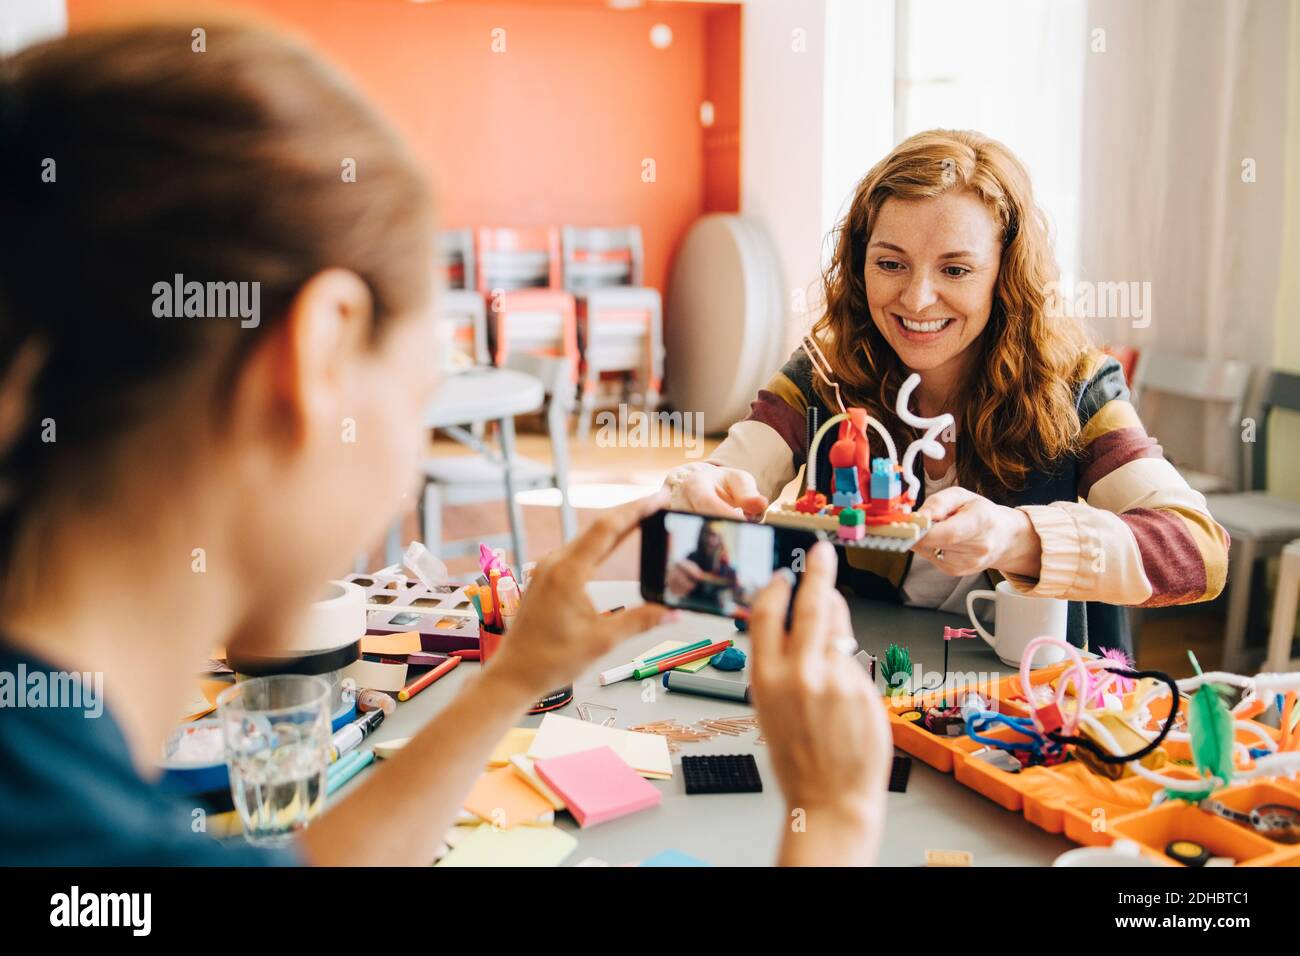 Businesswoman photographing smiling female colleague holding toy at table in creative office Stock Photo